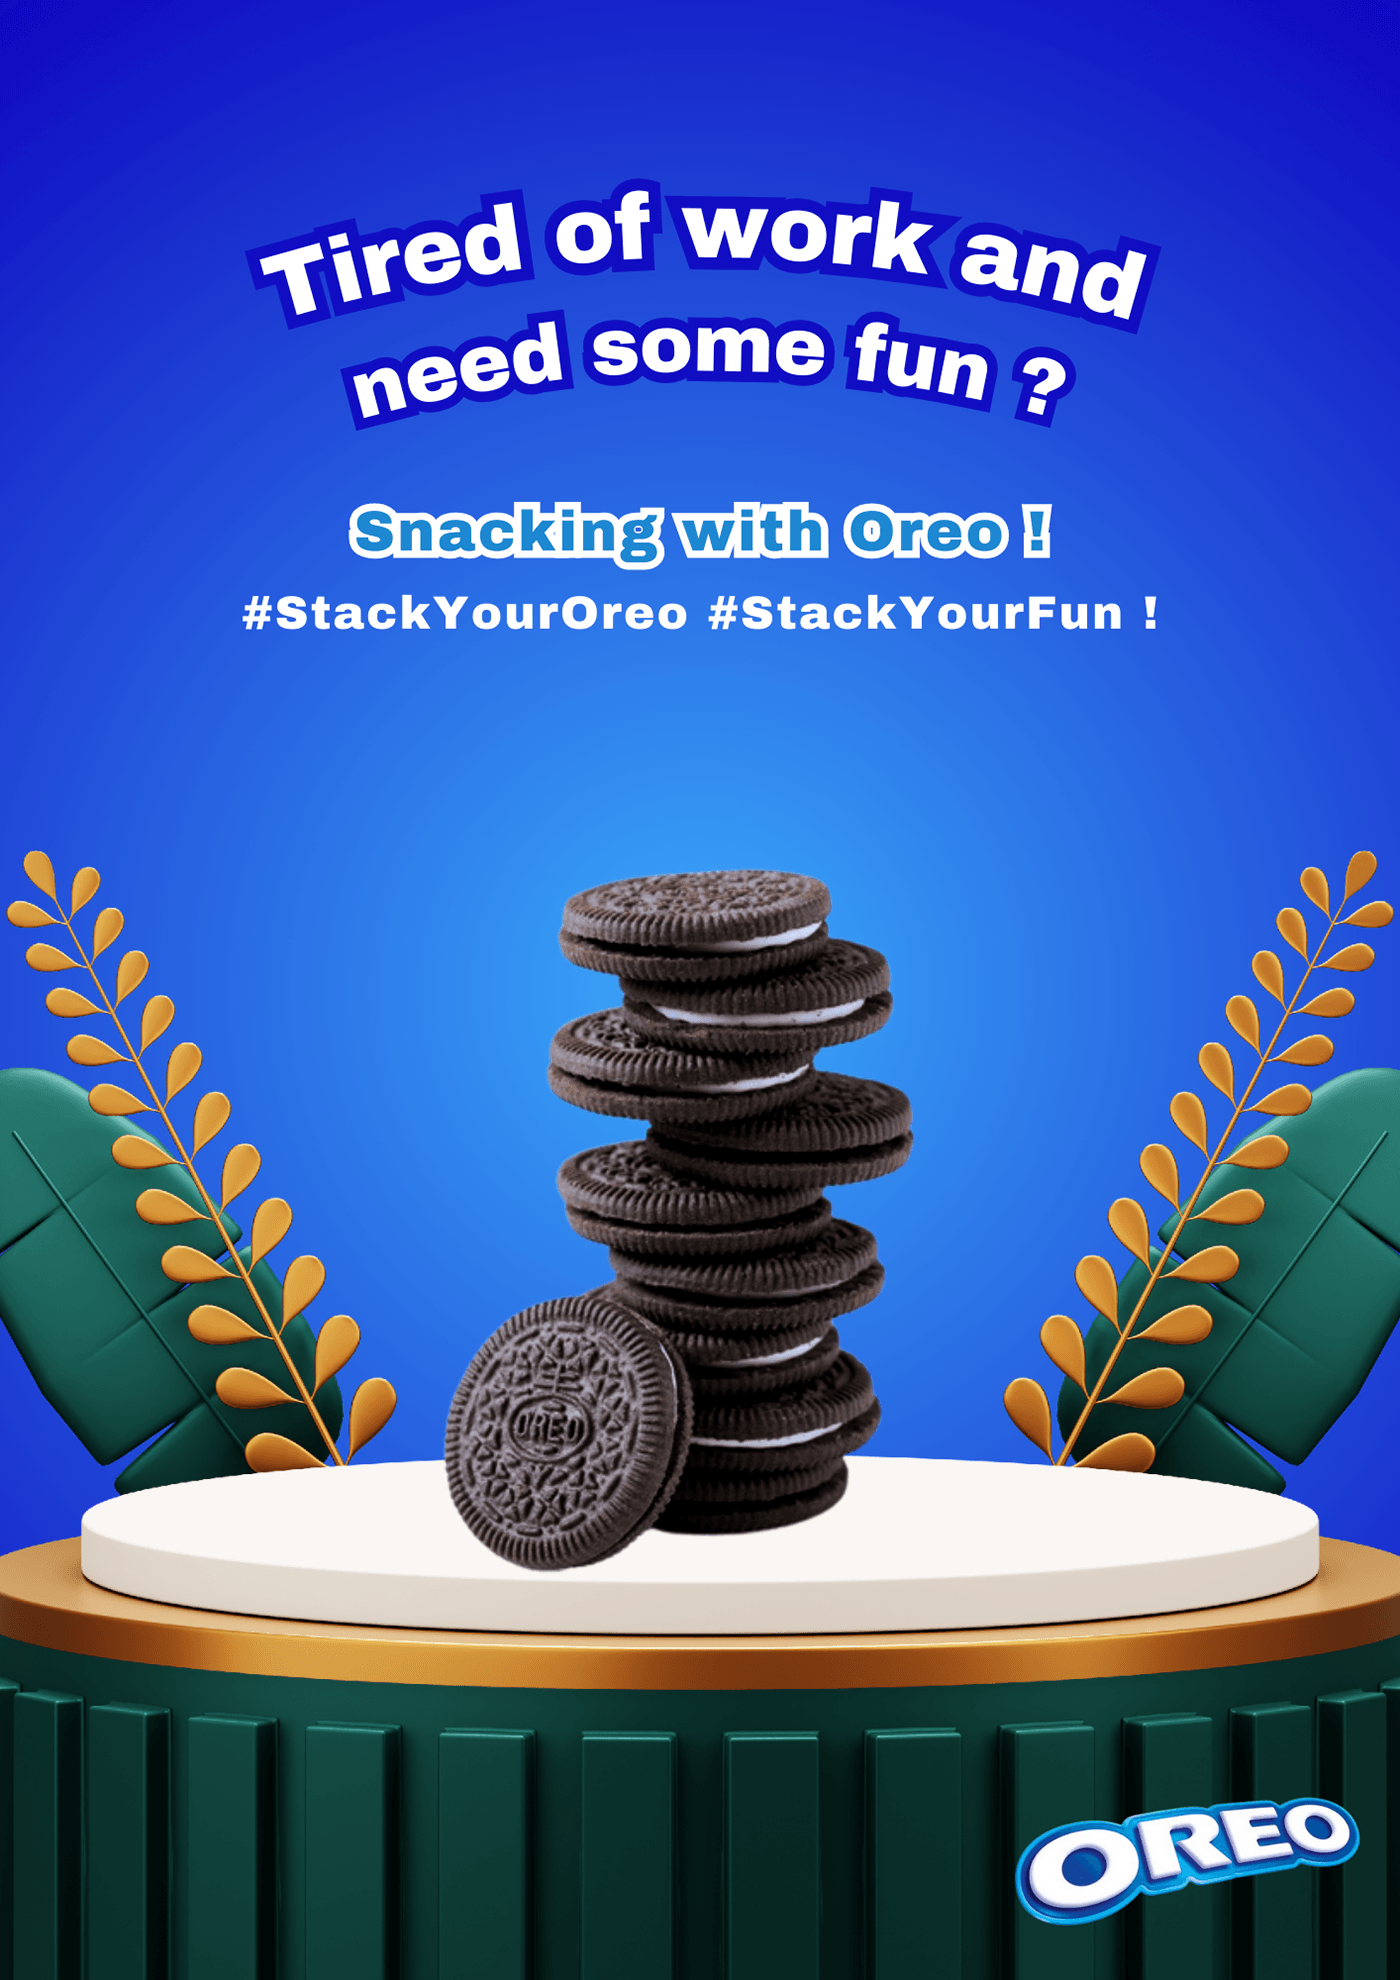 Advertising  oreo personalproject advertisement posteradvertising